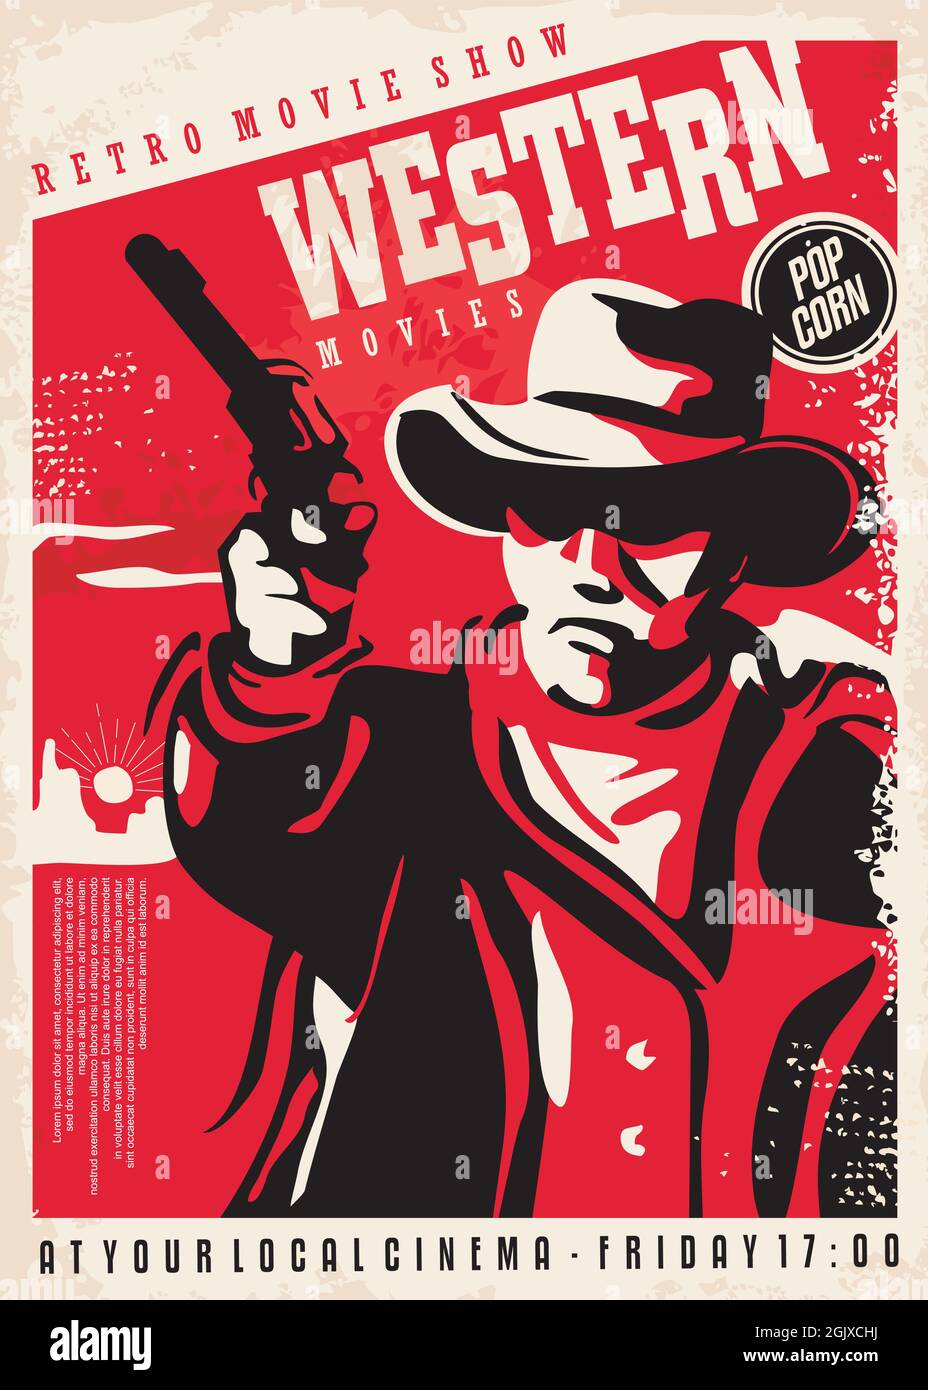 Gunman shooting with gun, retro poster concept for western movies festival. Vintage cowboy illustration. Wild west vector poster. Stock Vector